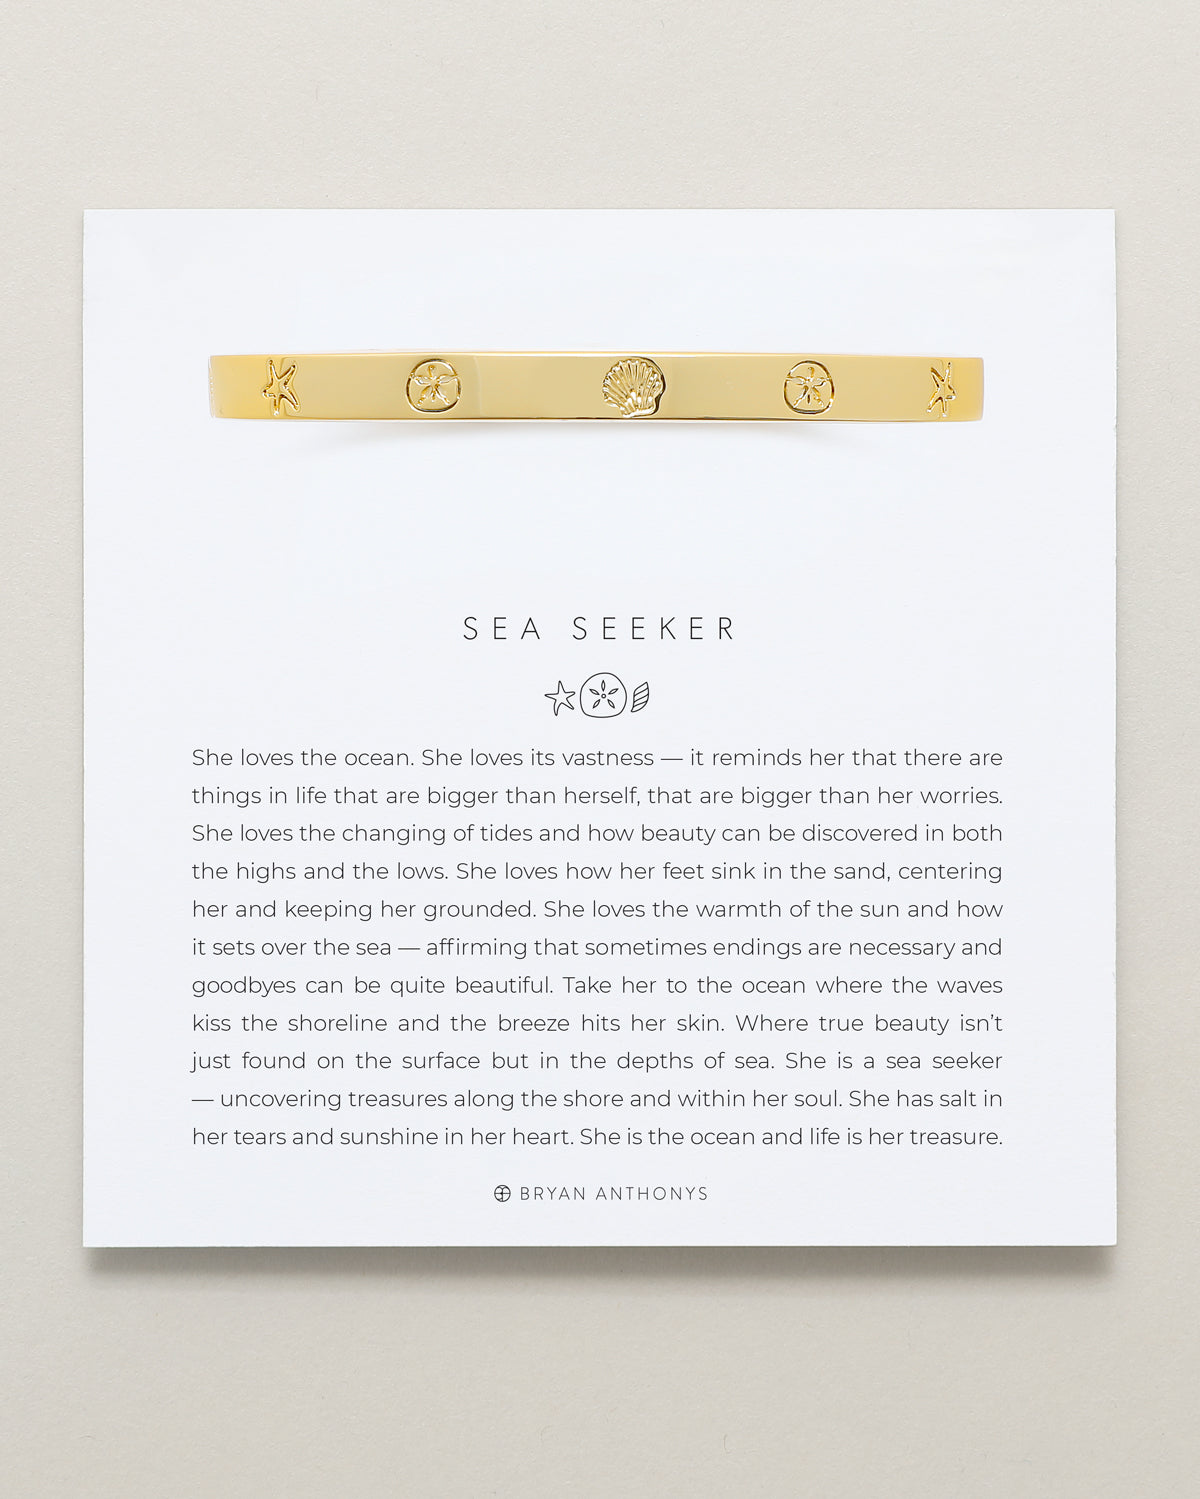 Bryan Anthonys Sea Seeker Gold Hinged Bracelet with sea shell engravings on card